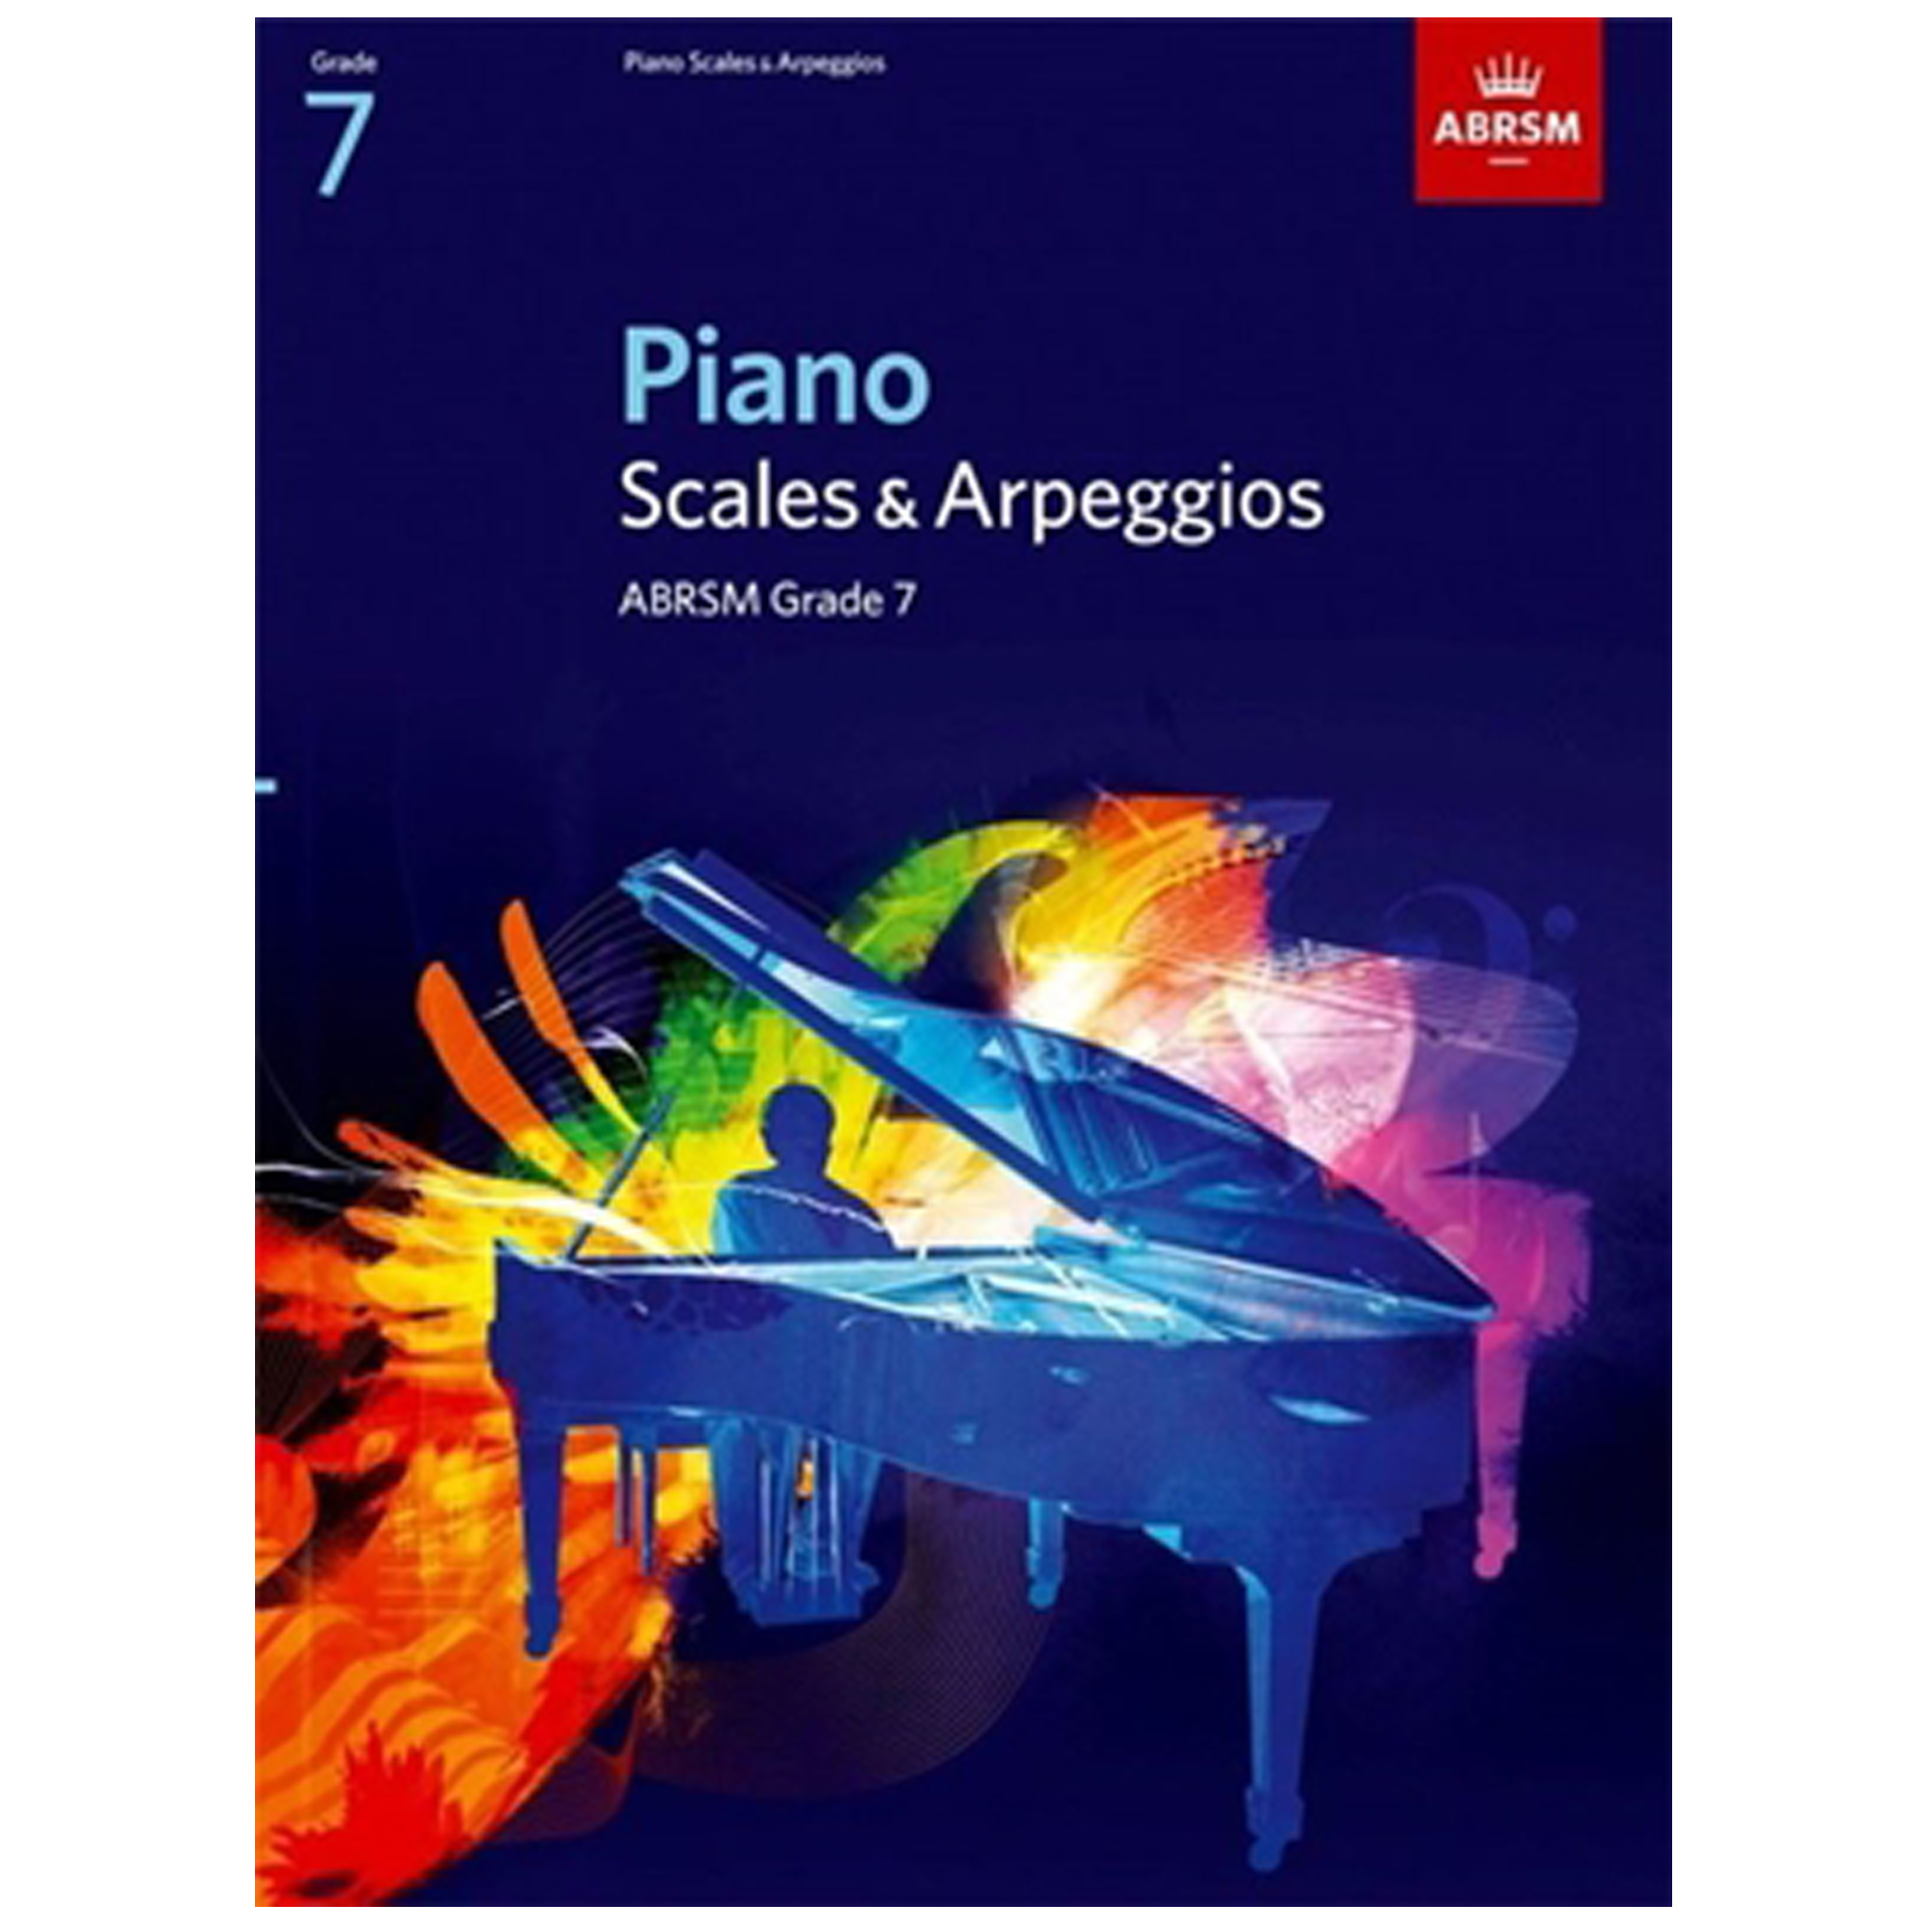 ABRSM Piano Scales and Arpeggios Grade 7 - Marshall Music